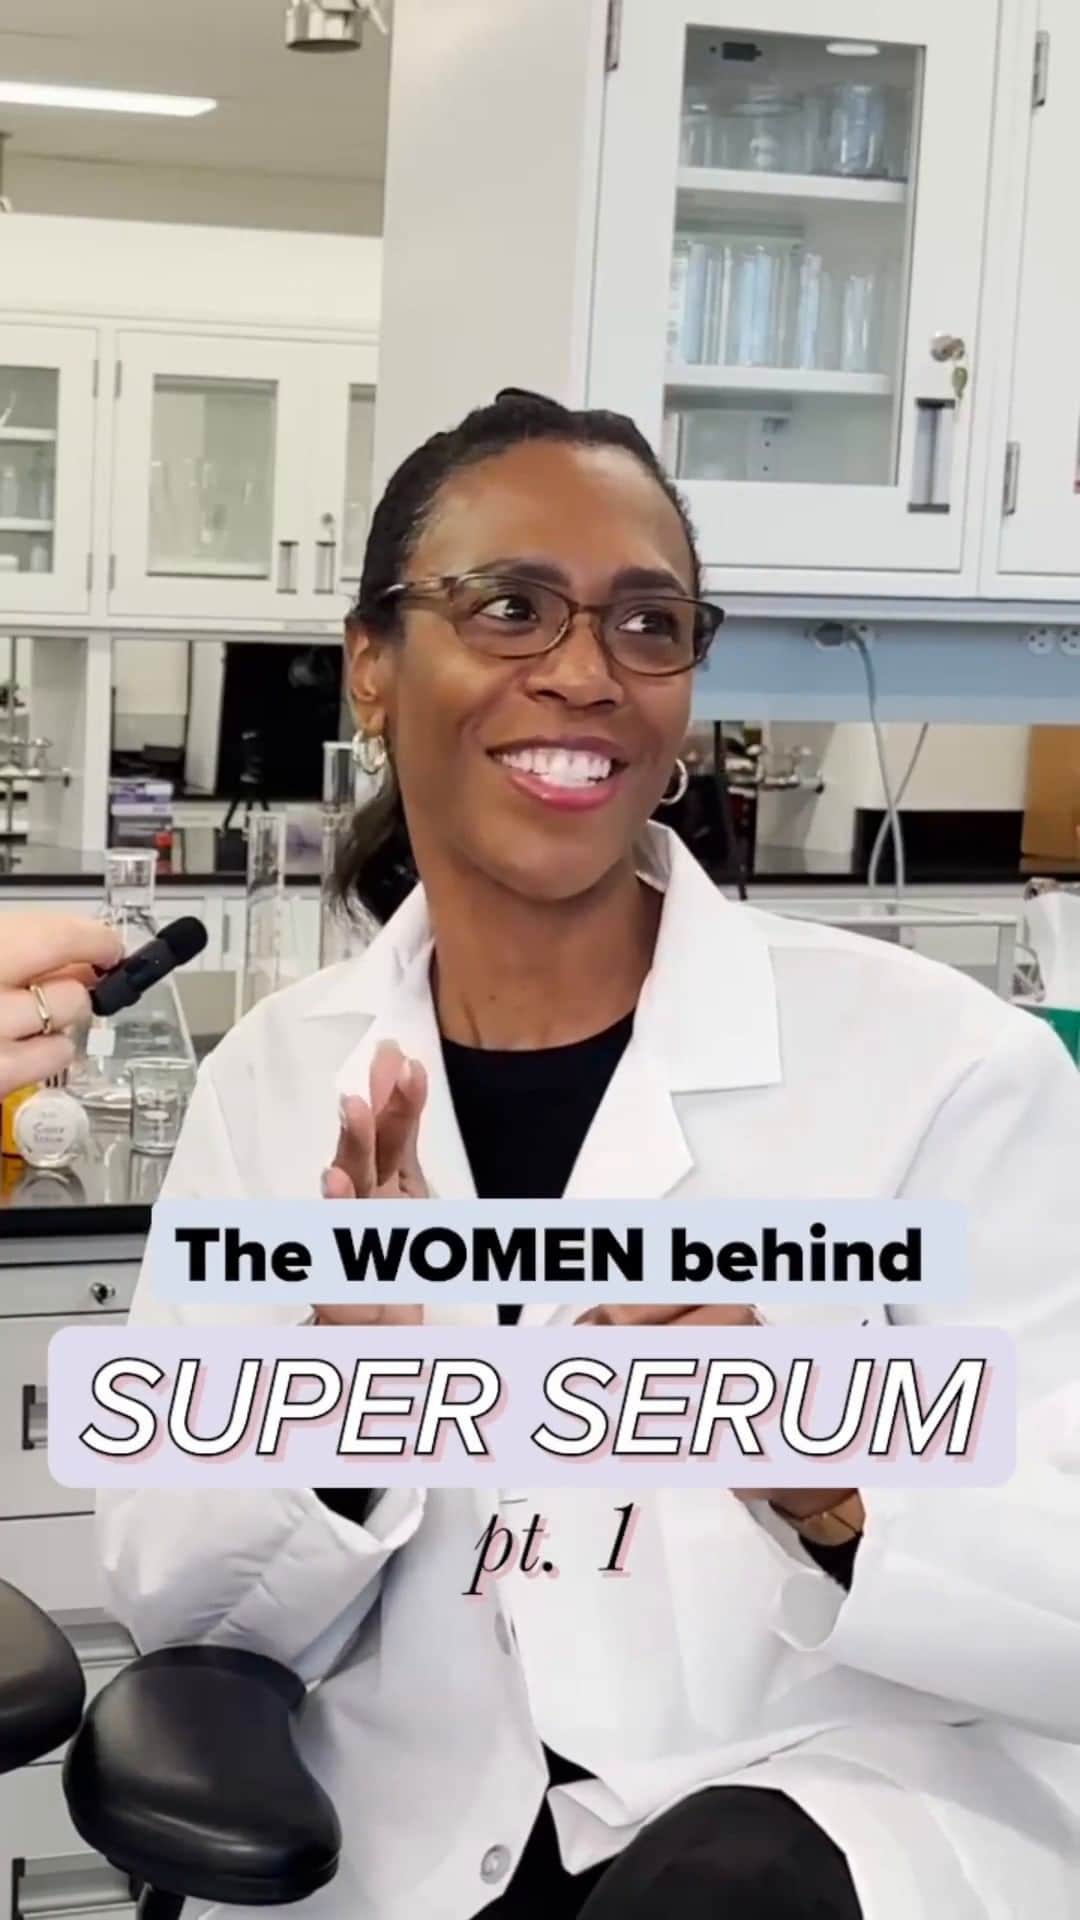 P&G（Procter & Gamble）のインスタグラム：「🚨A new @OLAY product just dropped!!!🚨 #OLAYSuperSerum  Introducing OLAY Super Serum and one of the women behind it, Dr. Rolanda Wilkerson (aka Dr. Ro) 👩🏾‍🔬 who has been with P&G working in skin care for nearly 20 years.🌟   “OLAY Super Serum is packed with a quintet of heavy-hitting ingredients including activated niacinamide, vitamin C, collagen peptide, vitamin E, and AHA, all working together to deliver Super Powered skin,” said Dr. Ro.  #PGInnovation   To learn more about @OLAY Super Serum – click the link in our bio and stay tuned for some myth-busting around serums!」